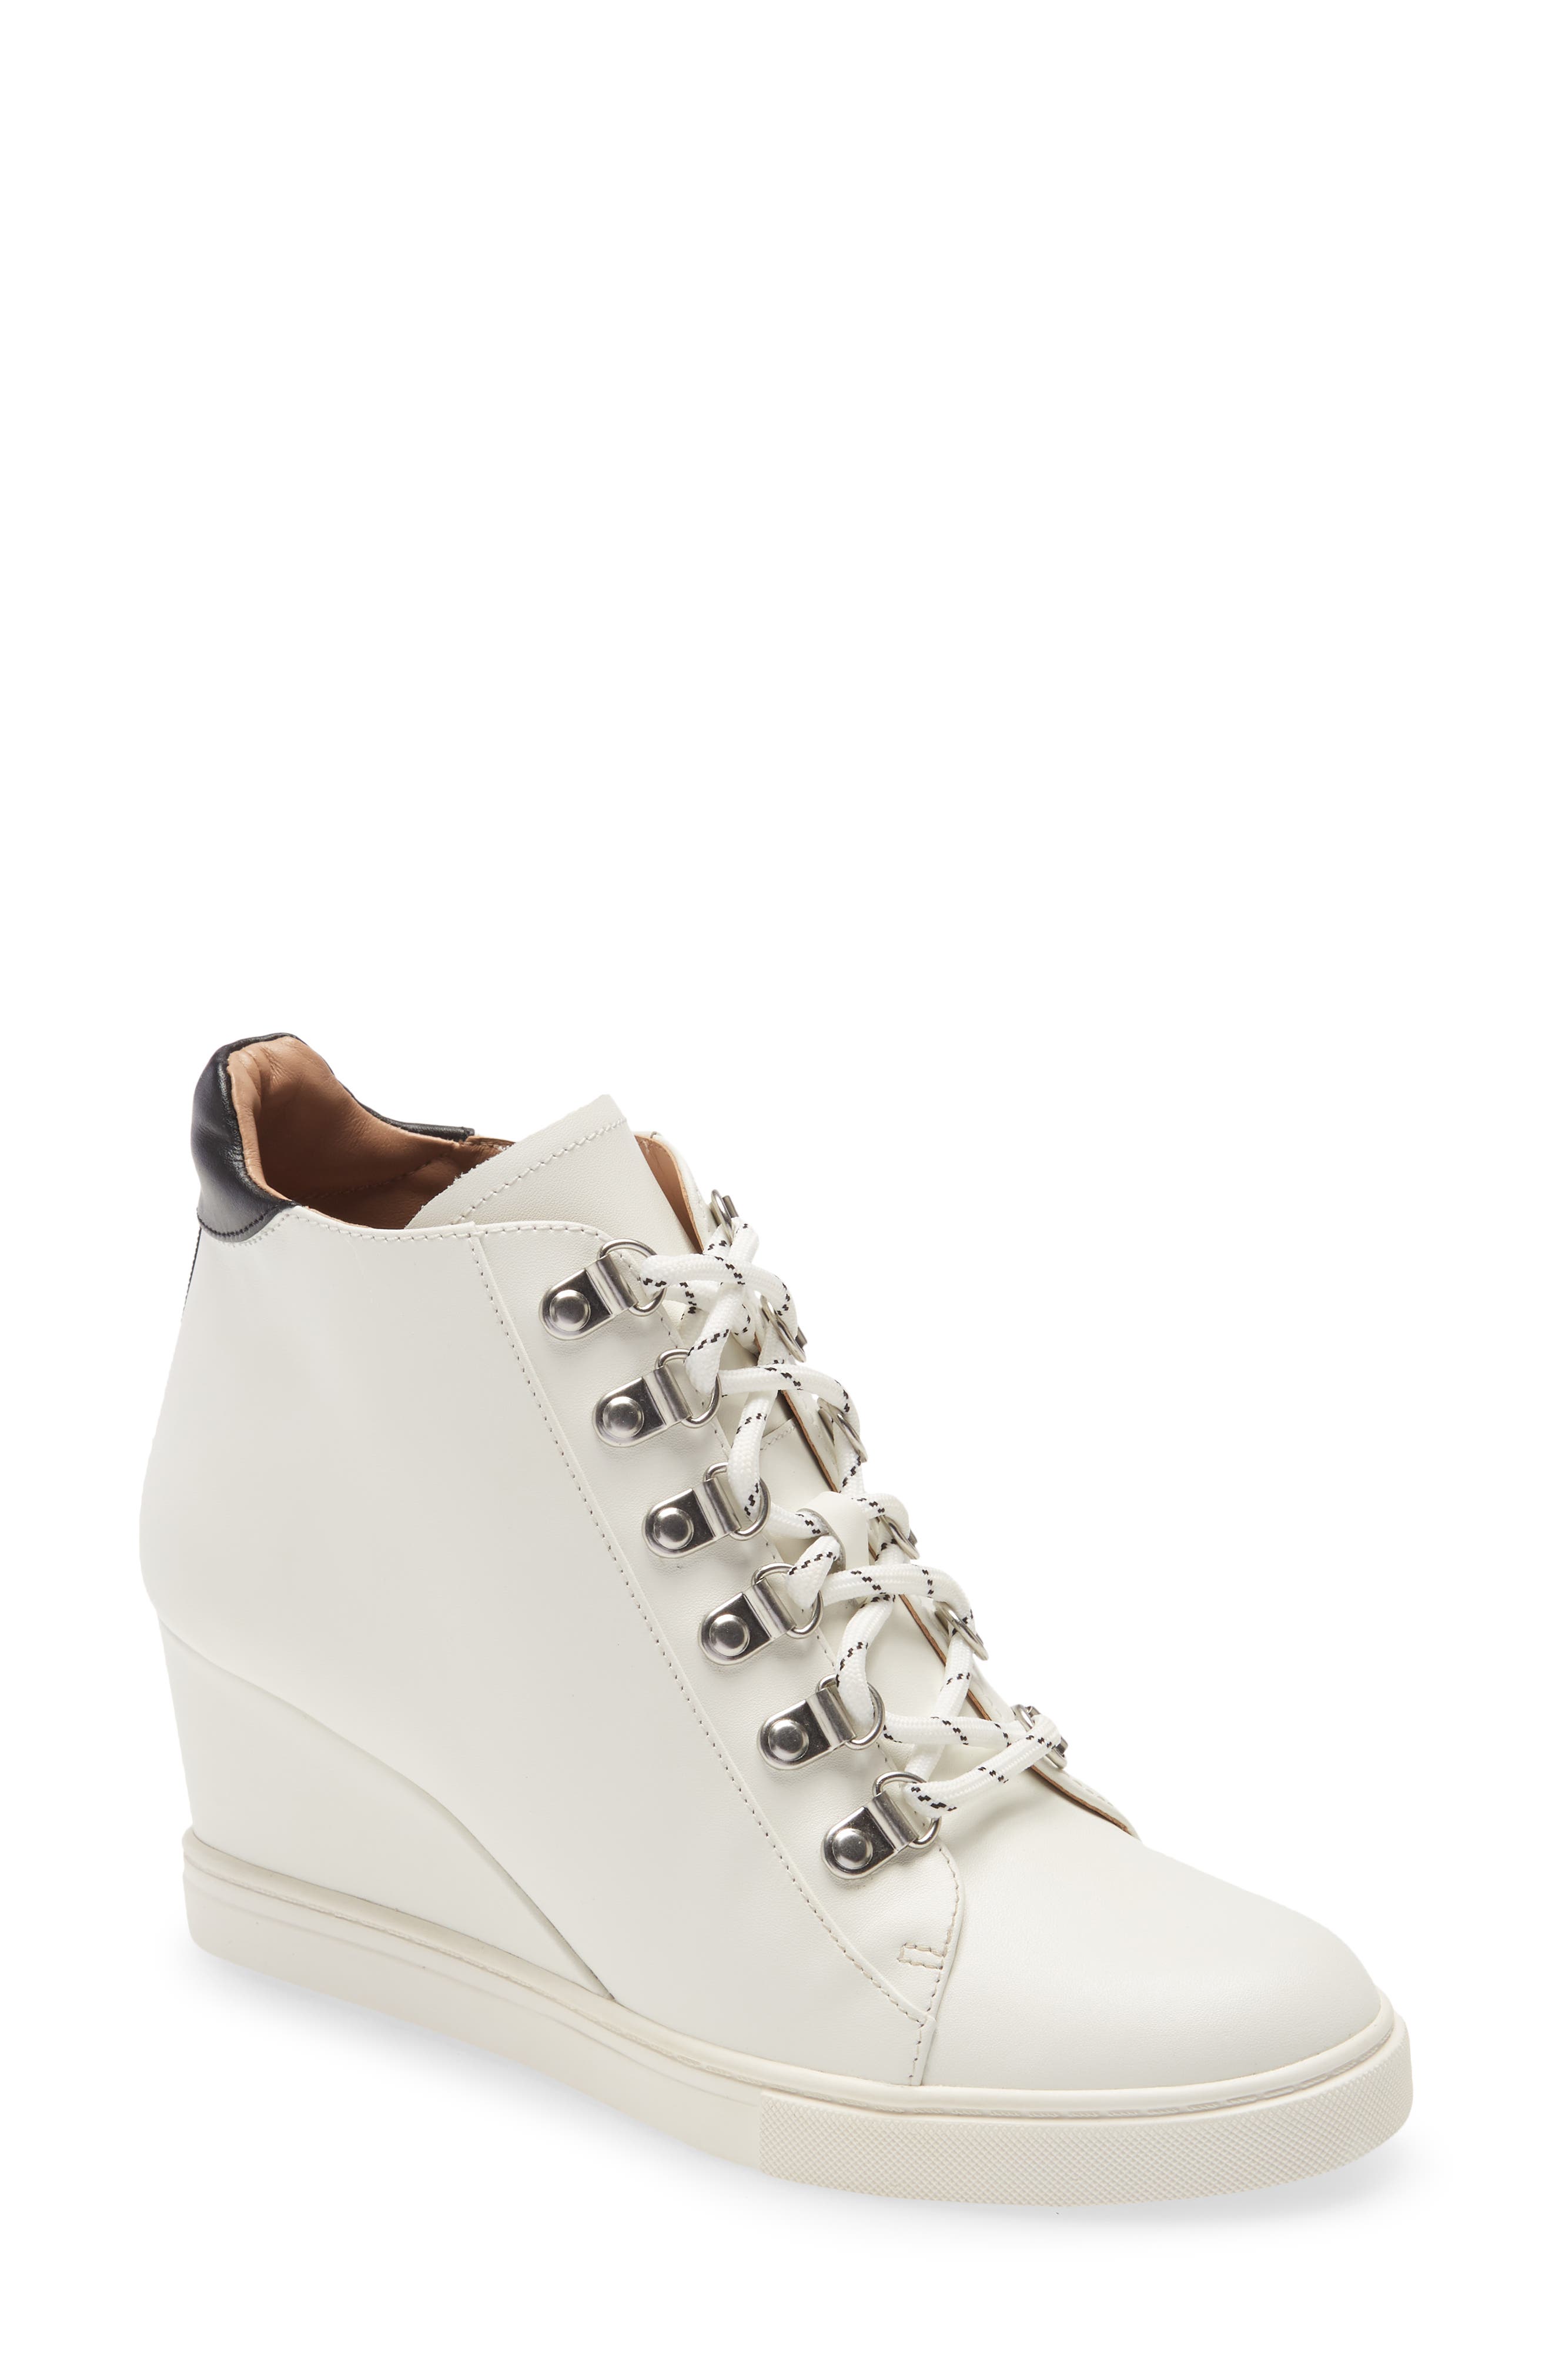 nordstrom wedge tennis shoes